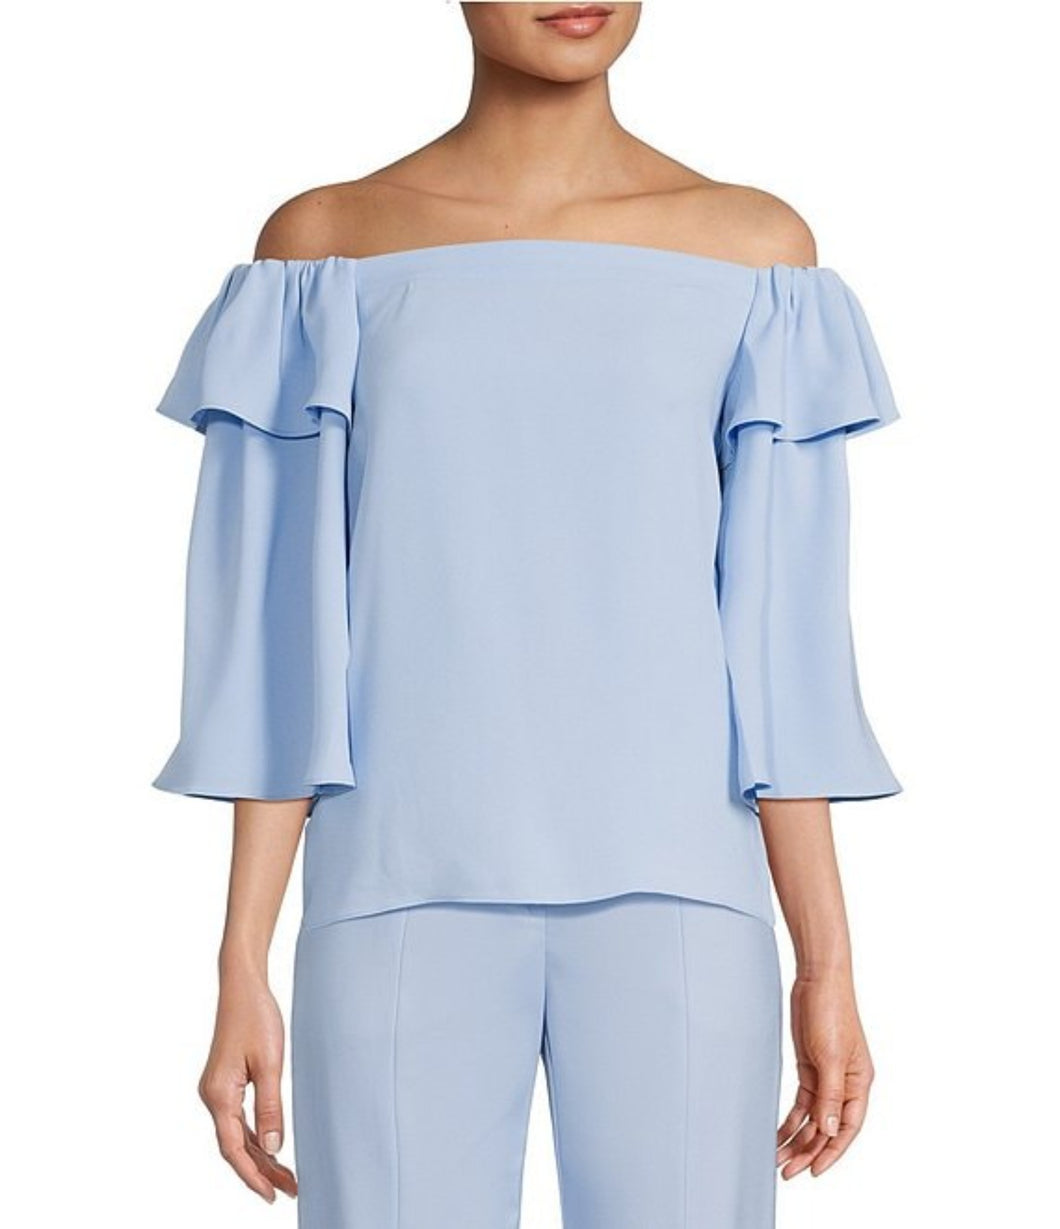 Trina Turk Excited Woven Off-the-Shoulder Hem Ruffled Top